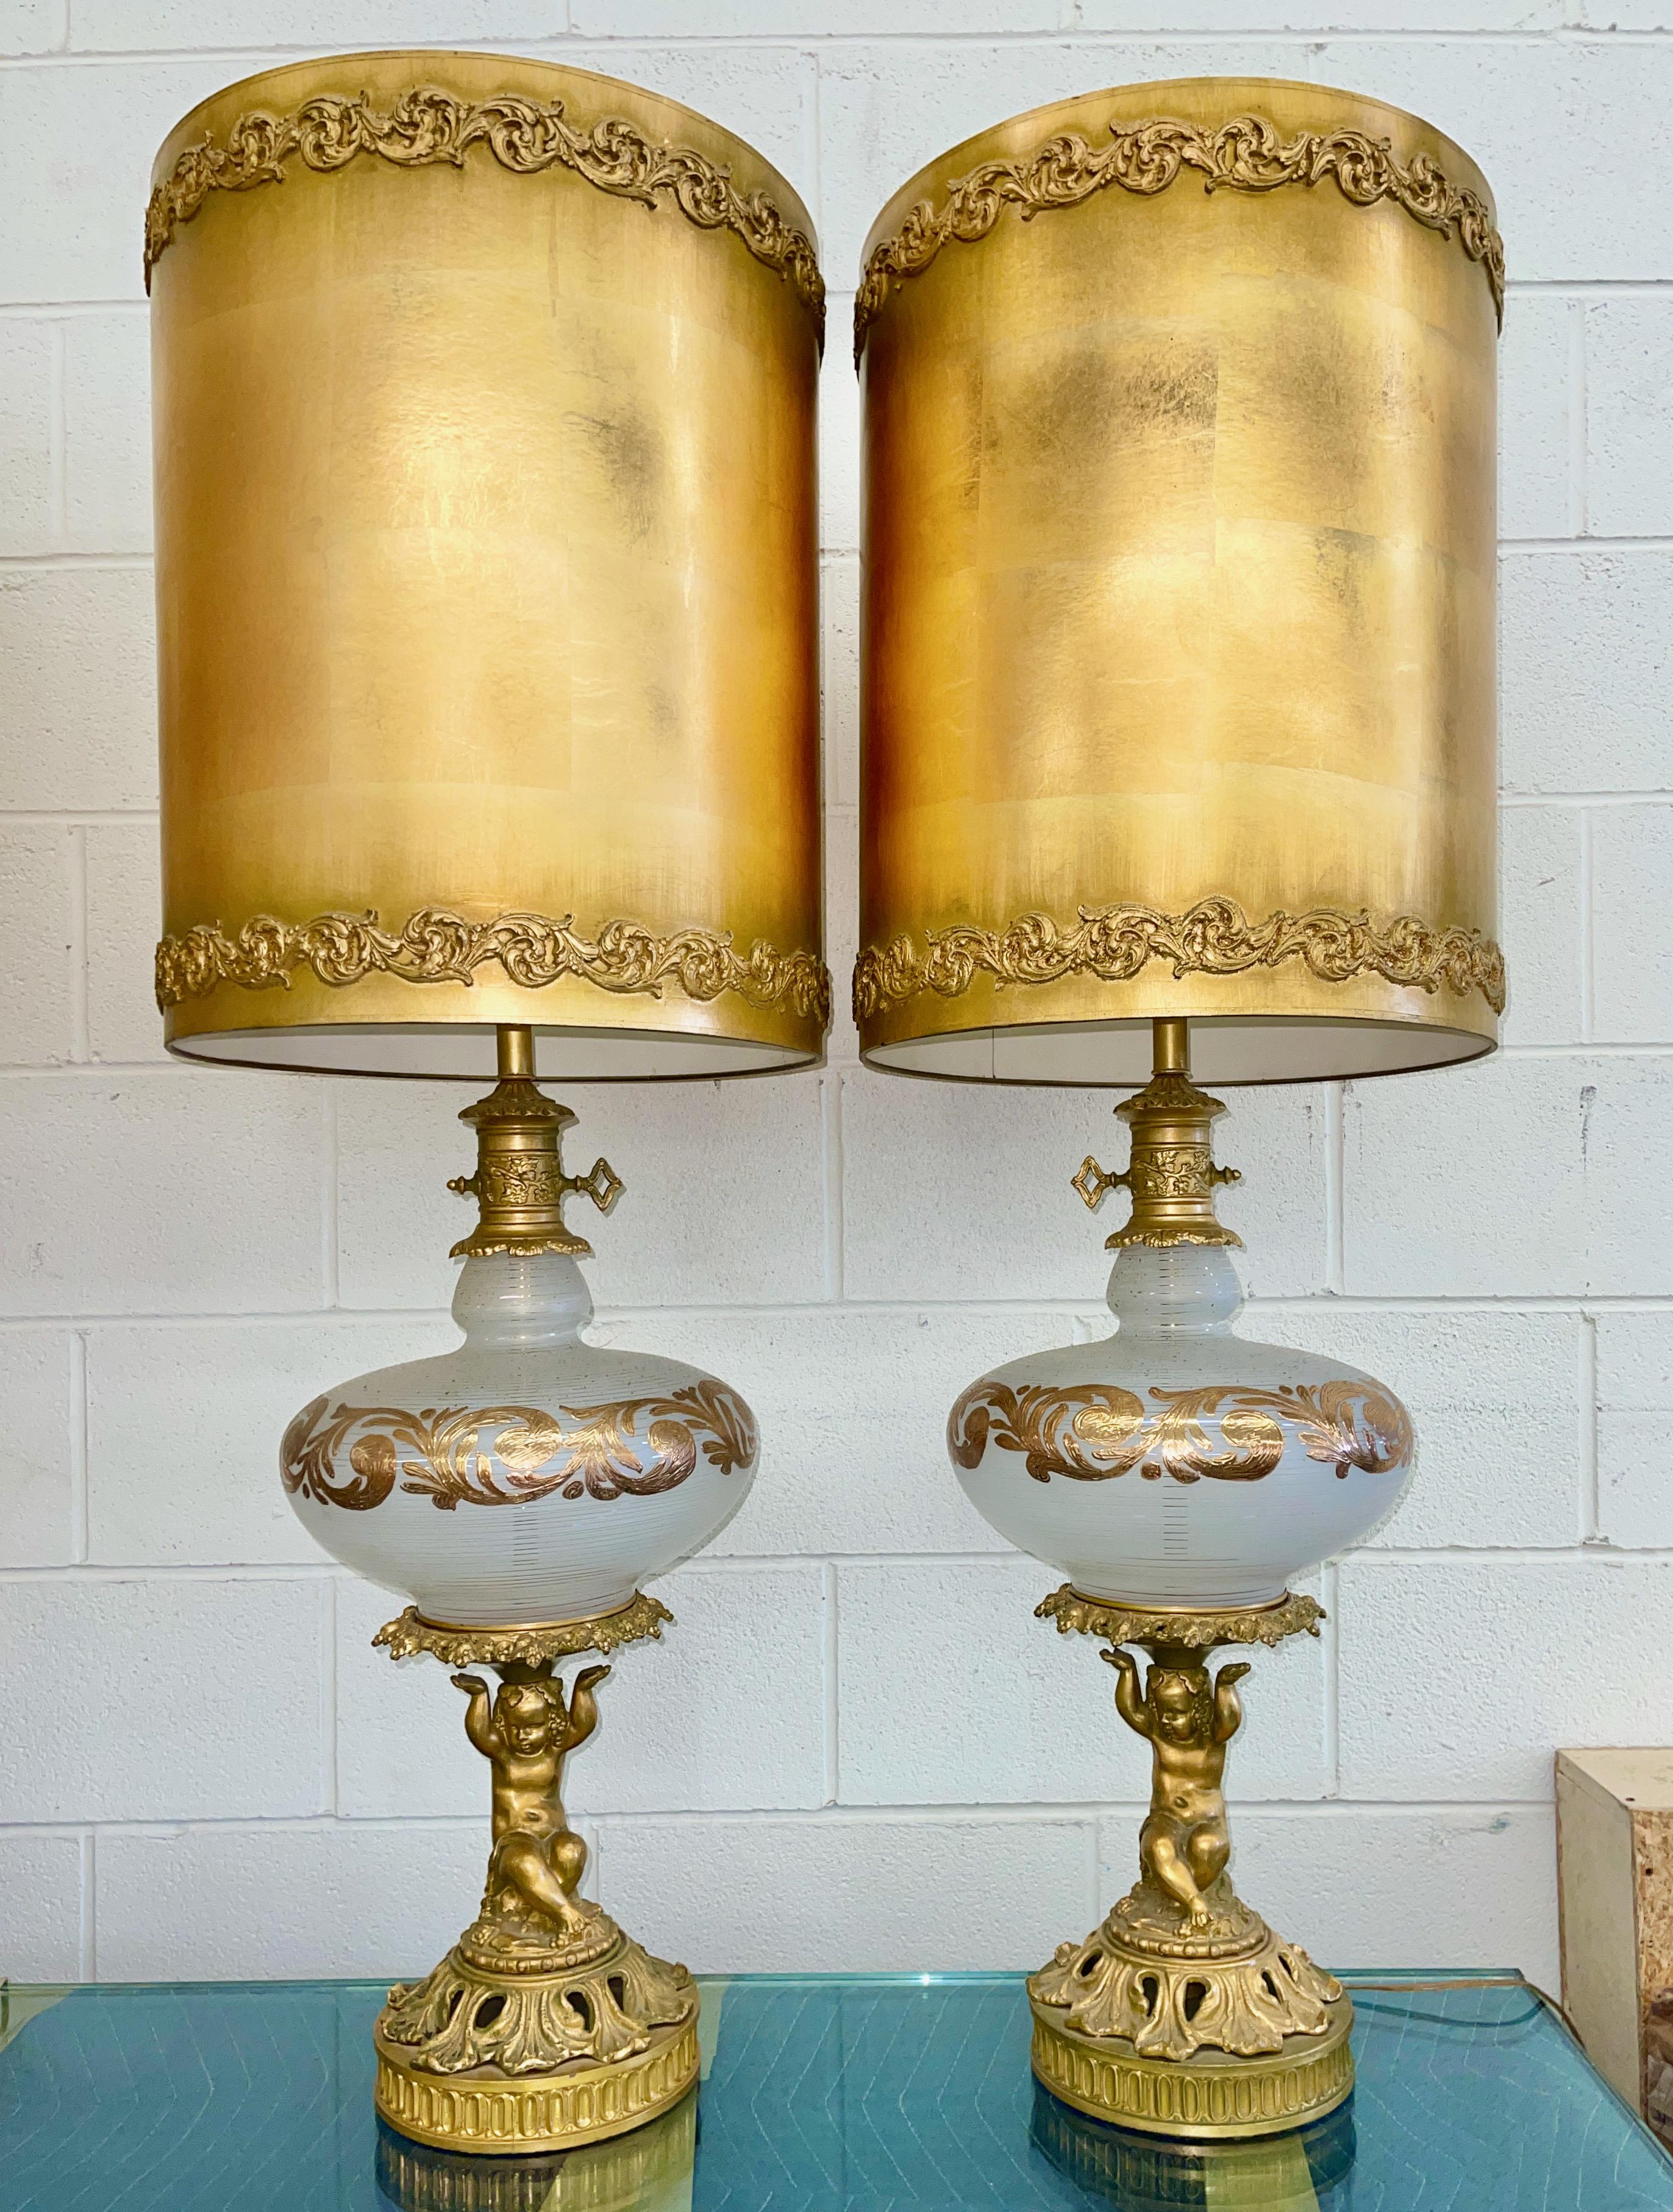 Pair of outrageously over the top (bordering on kitsch) pair of monumental table lamps created in the early 1960's in the style of Carl Falkenstein, Marbro and Rembrandt lighting. 
The ultimate in mid-century Hollywood Regency including original